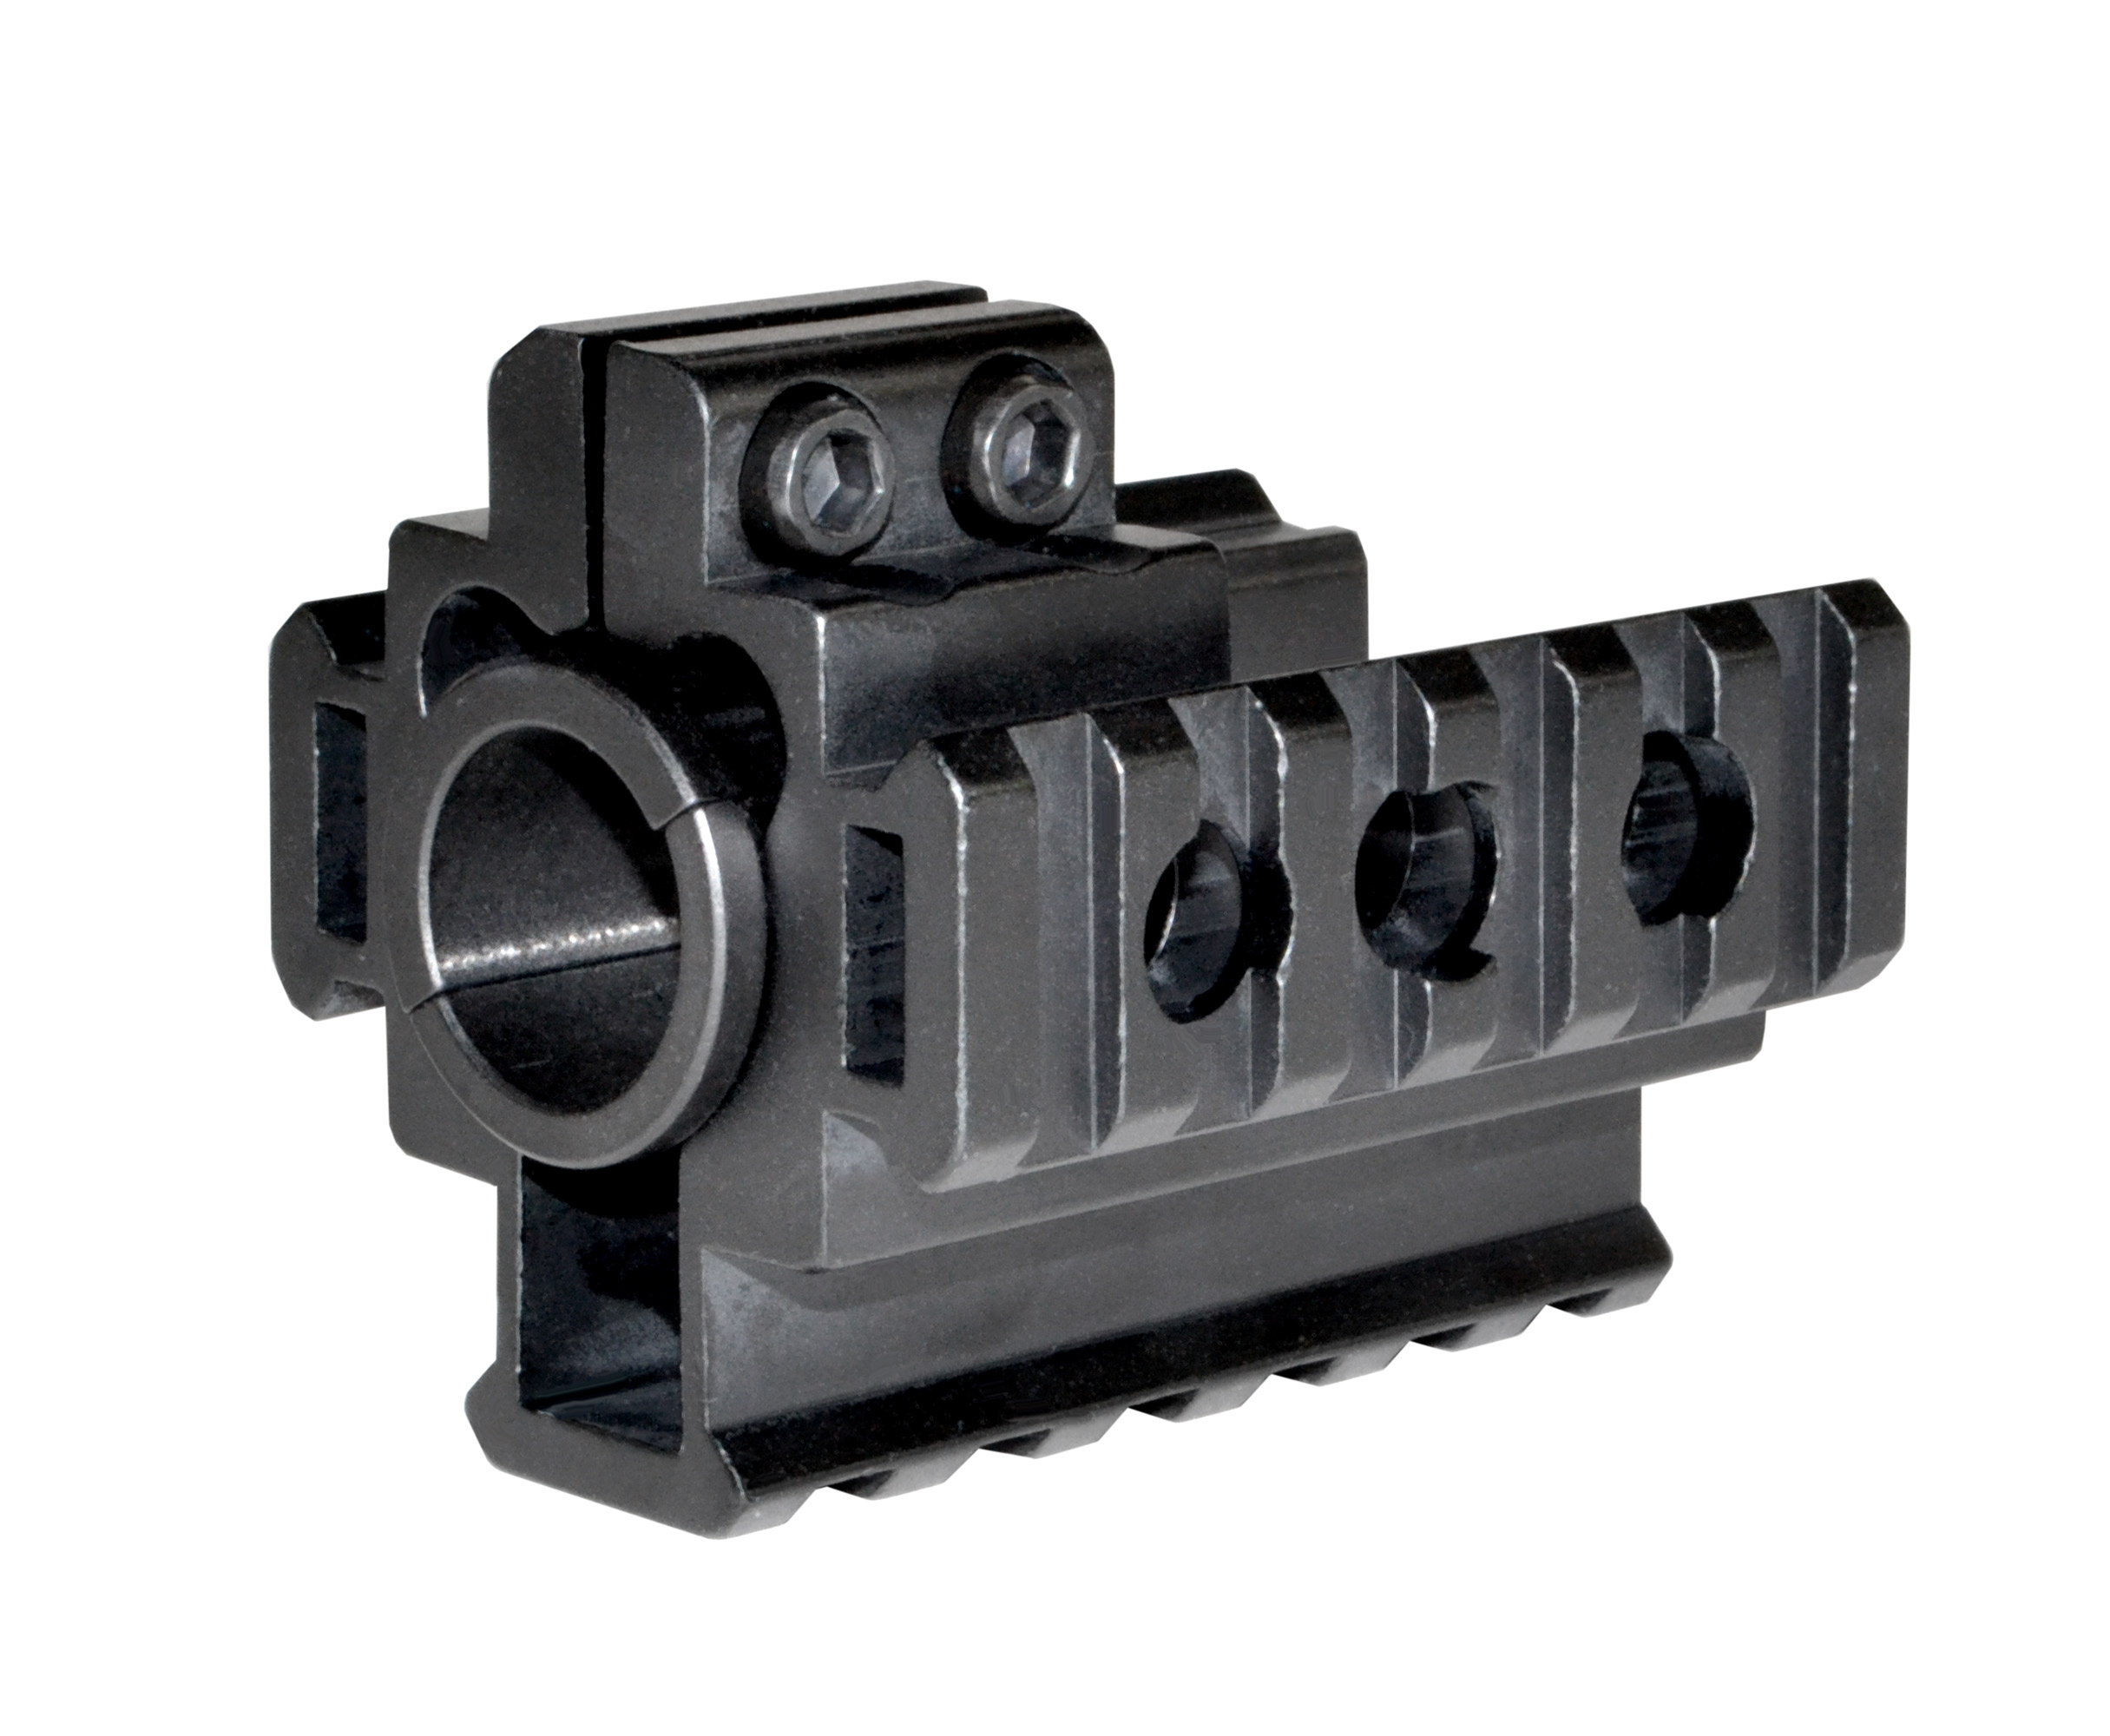 For AR-15s with A2 Front Sight Post/Bayonet Lug & 2pc drop-in handguard...